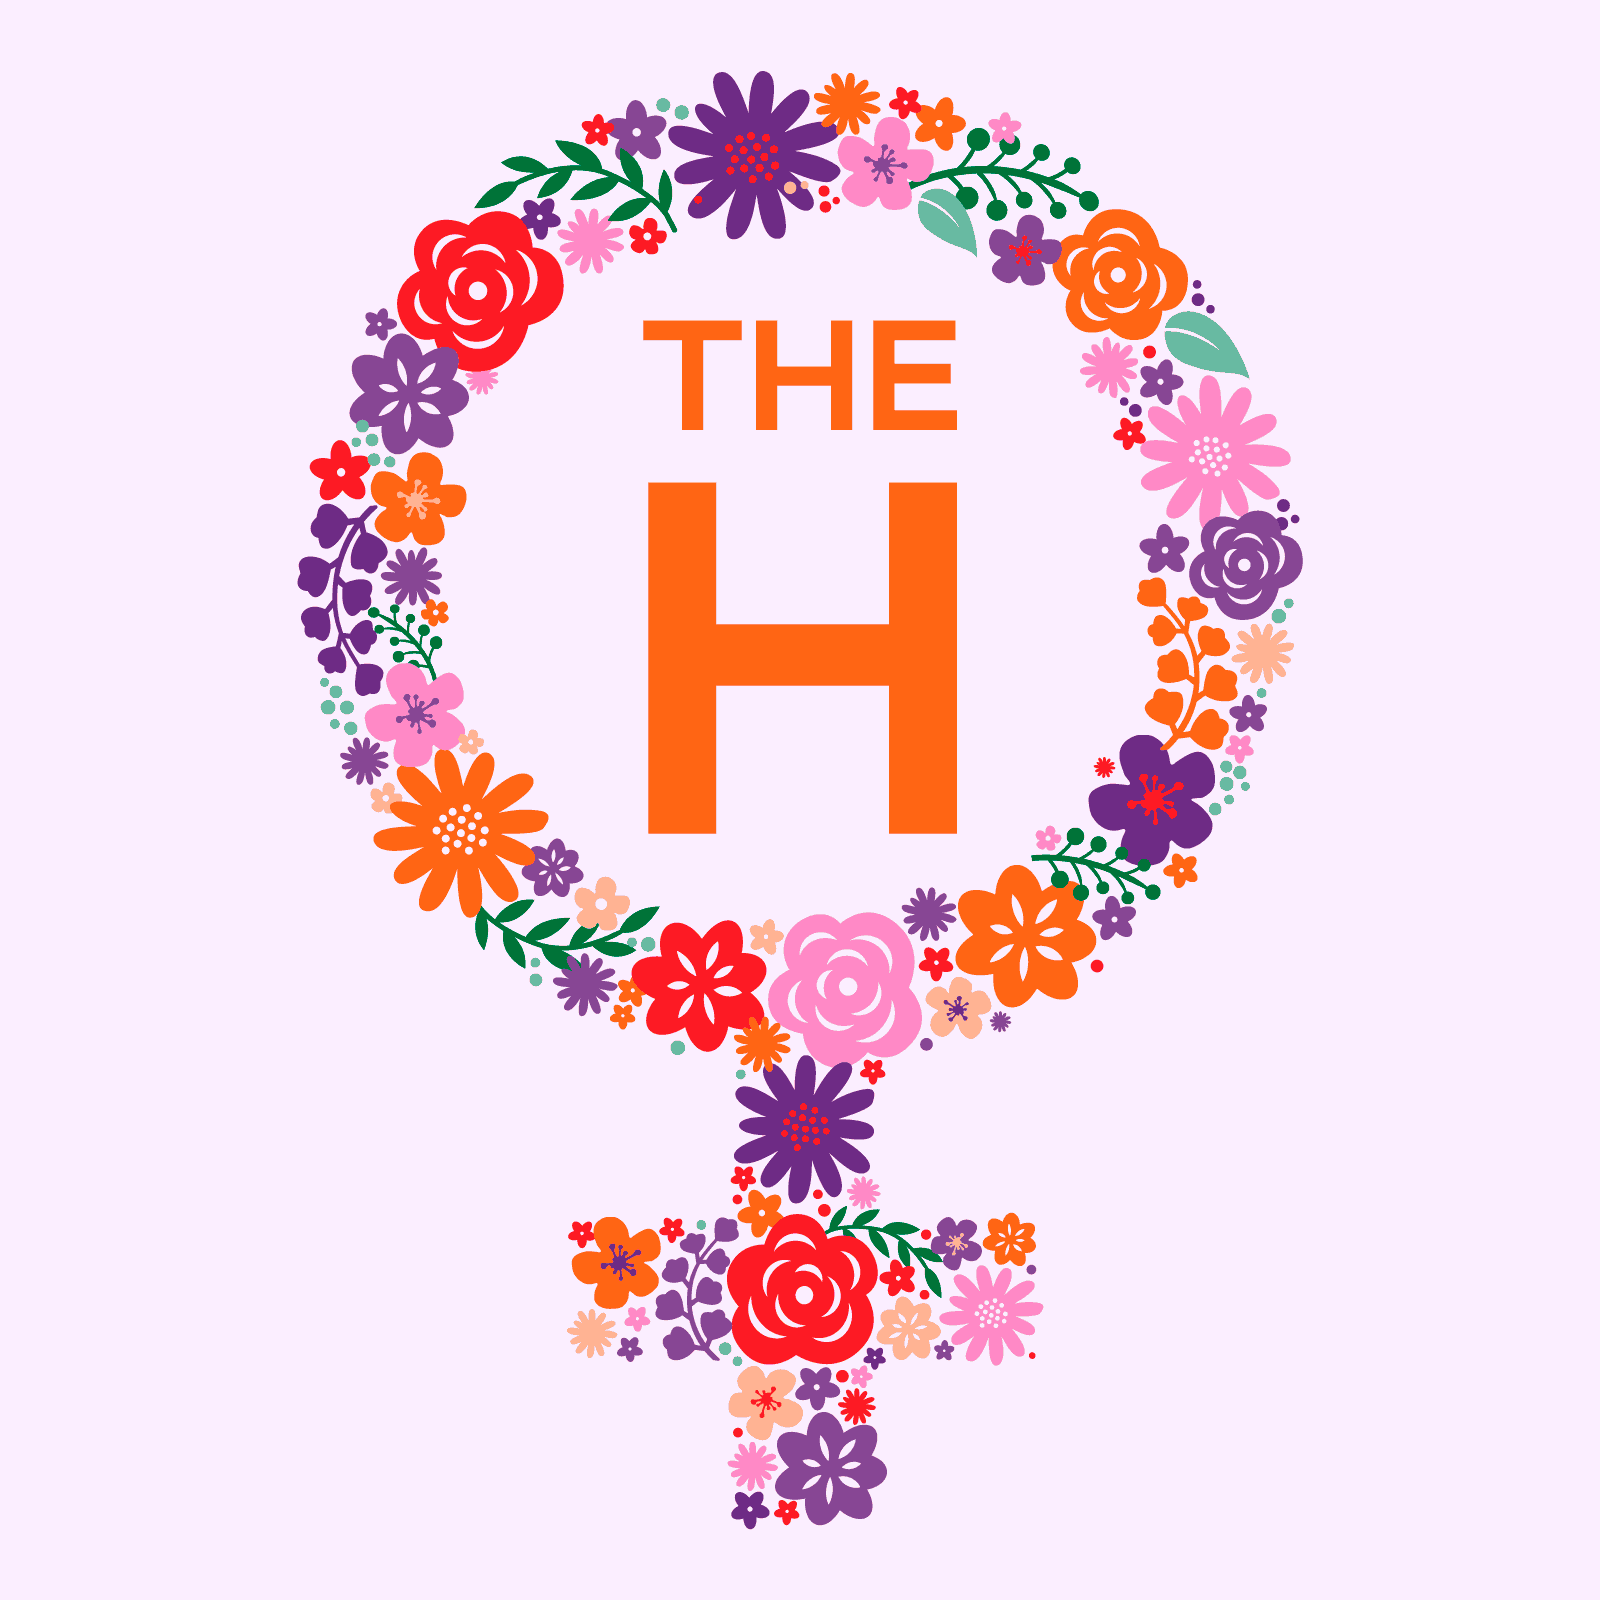 Female symbol made of flowers with The Healthy logo inside the circle